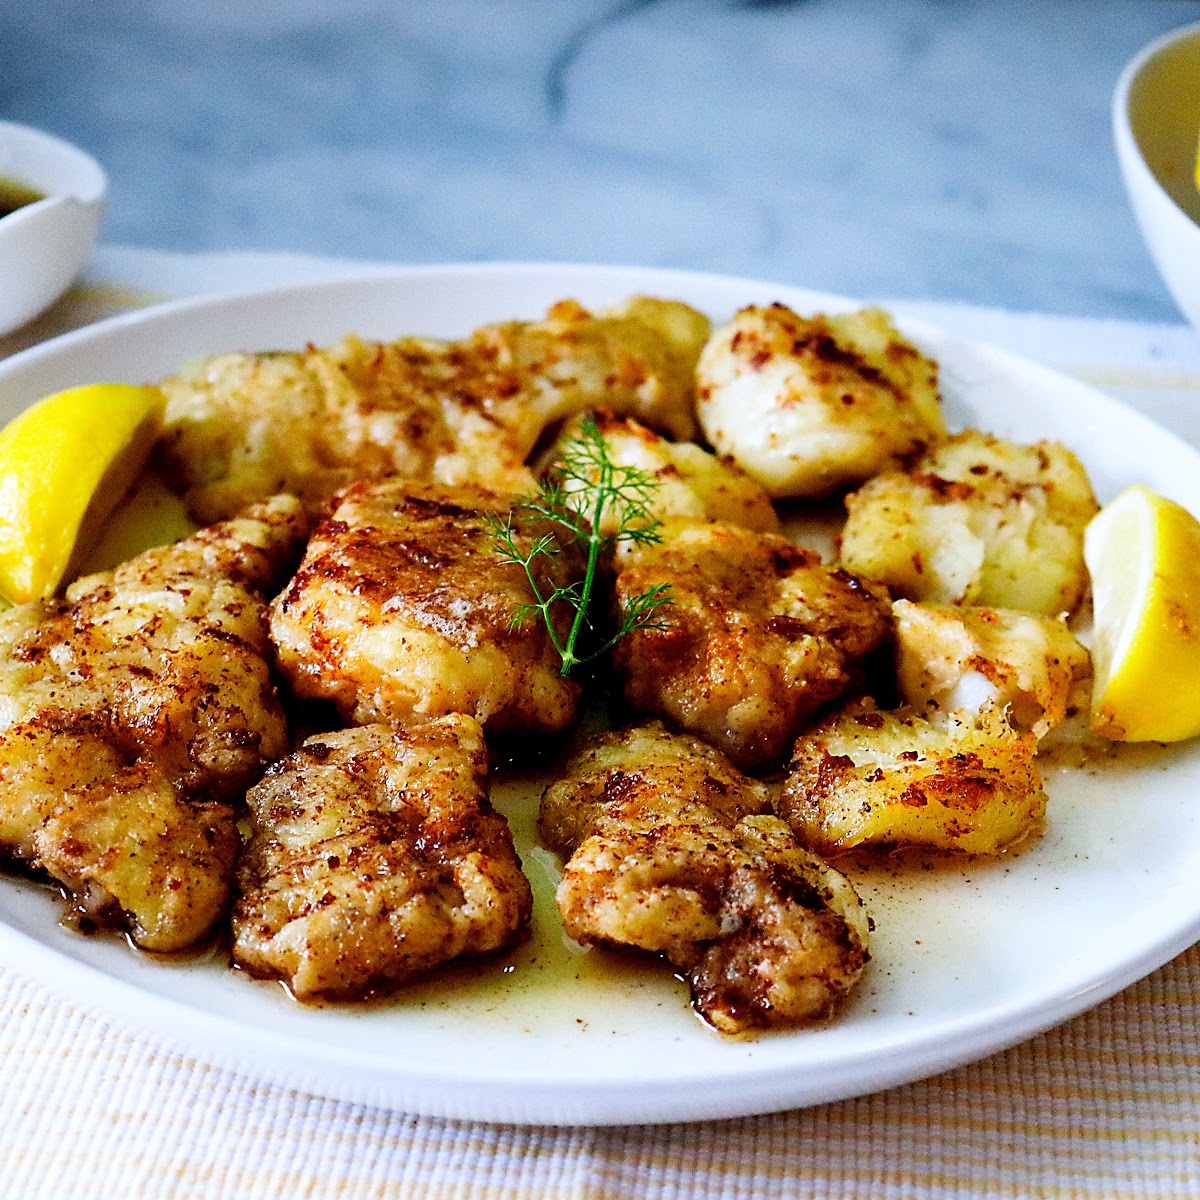 Pan-fried fish fillets - with a light batter - Foodle Club